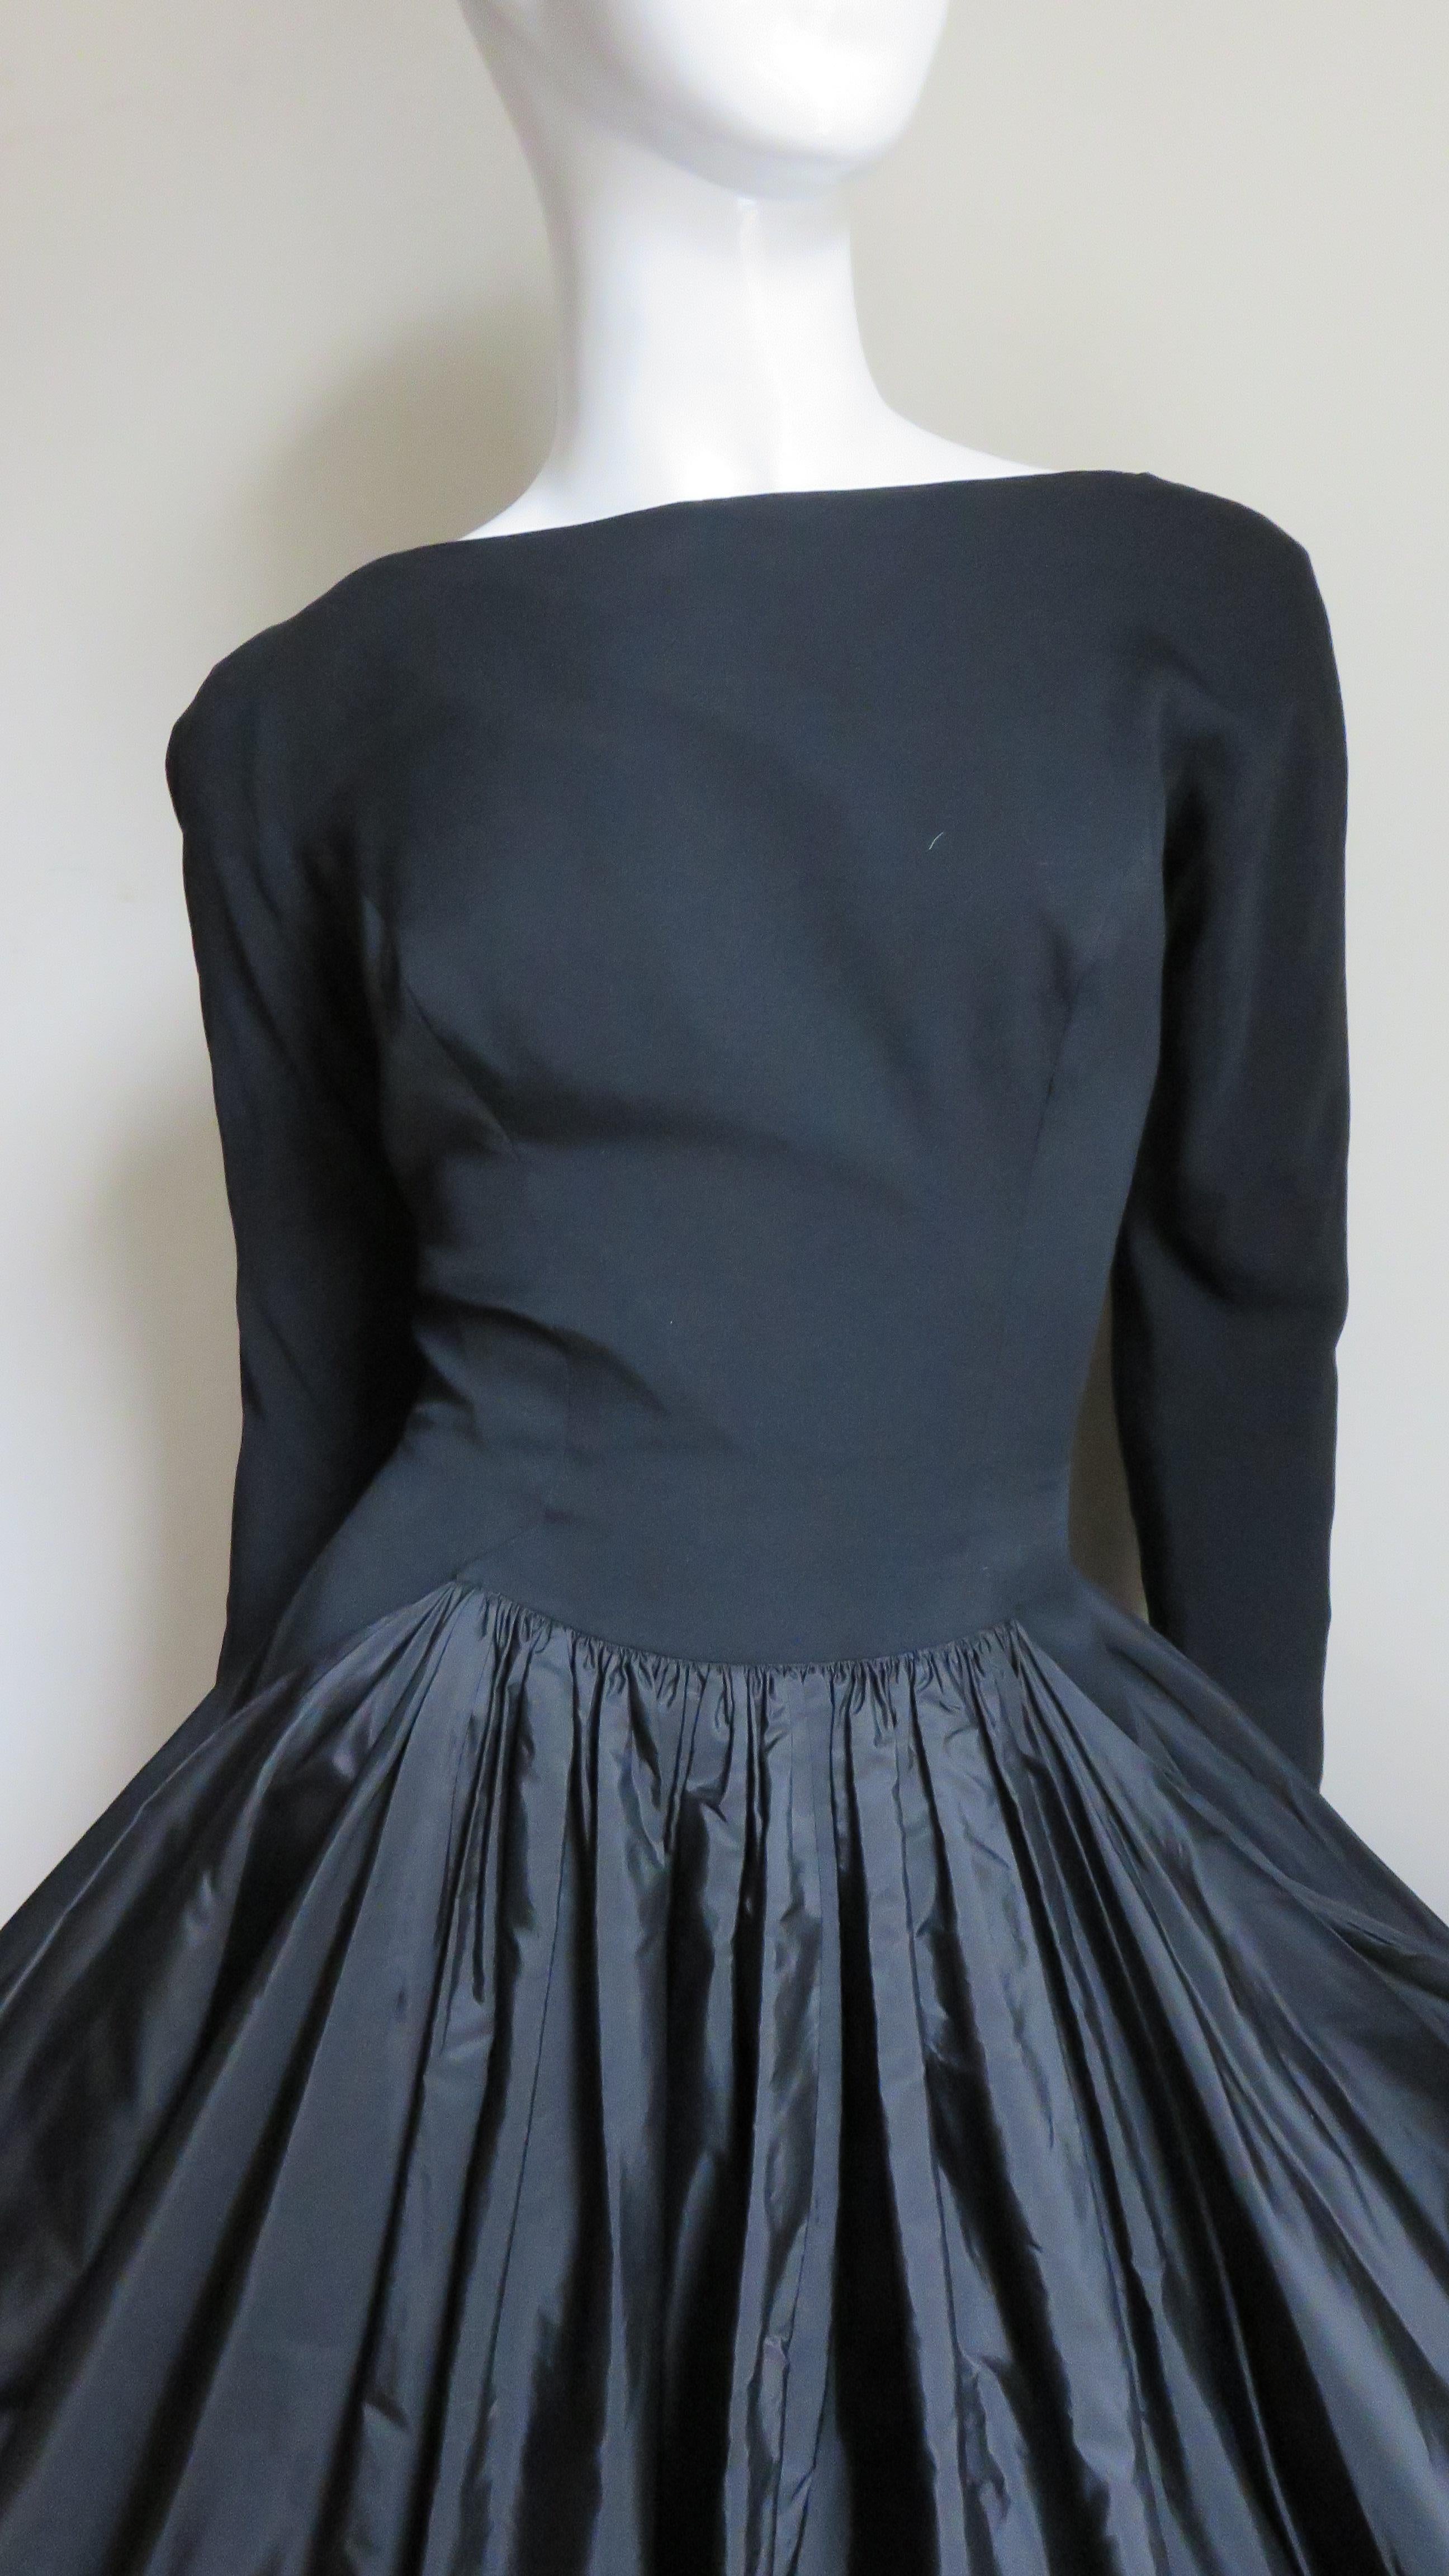 Marberl 1950s Silk Skirt Draped Dress In Good Condition For Sale In Water Mill, NY